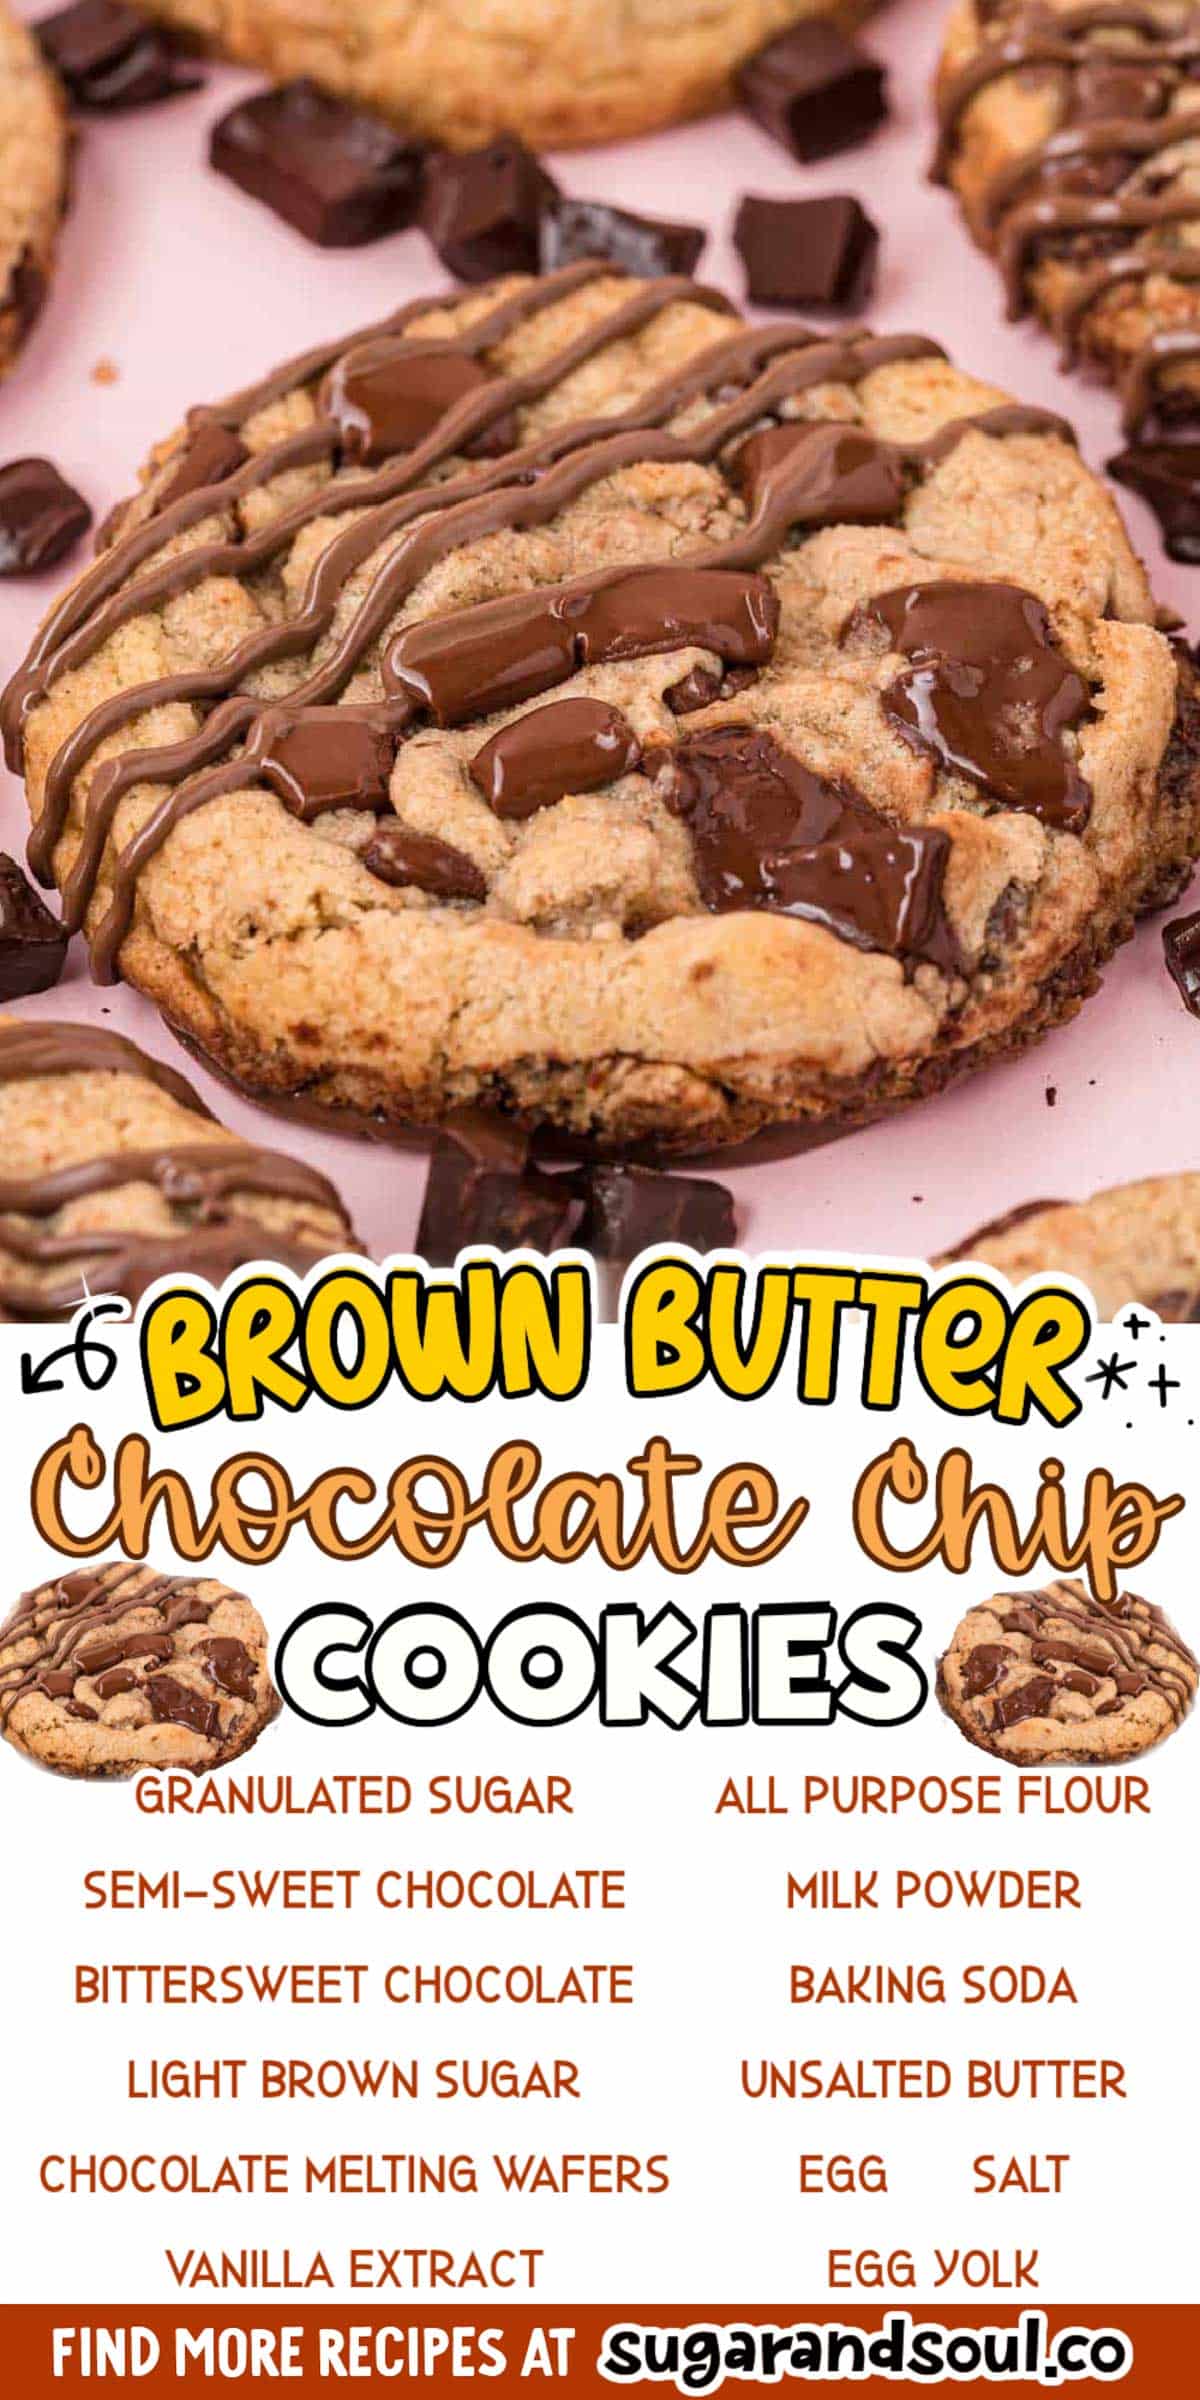 These homemade Brown Butter Chocolate Chip Cookies are a sweet chewy treat with a deep, nutty, and chocolaty flavor thanks to the brown butter. Dip them in chocolate for an extra fancy finish! via @sugarandsoulco